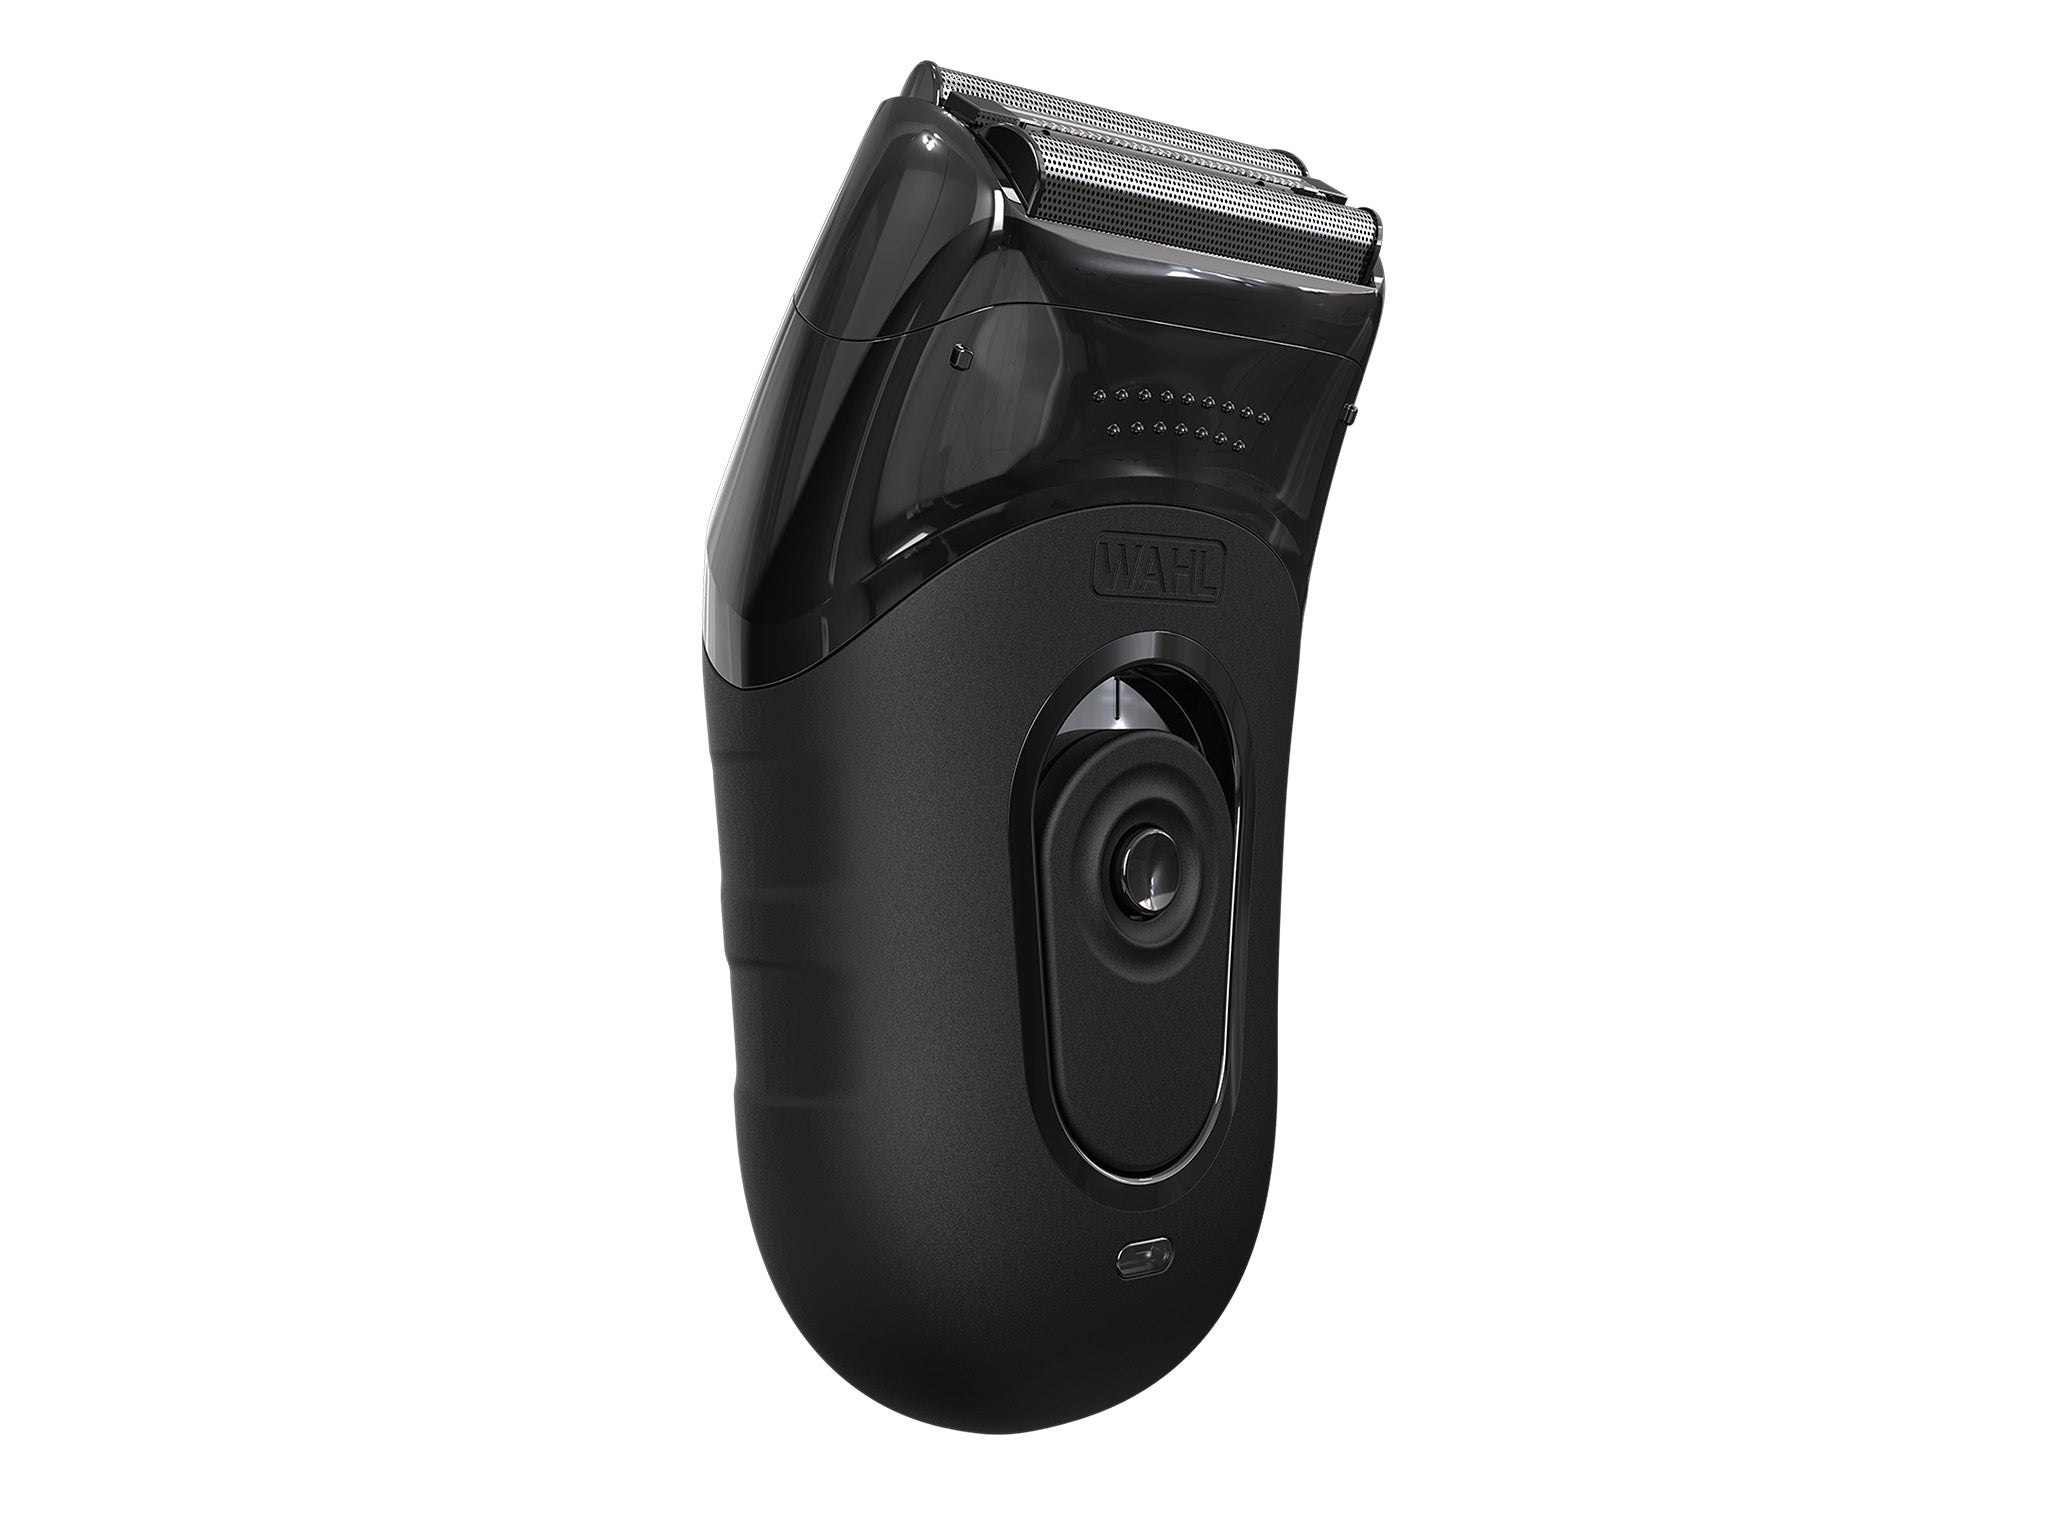 Wahl compact travel shaver